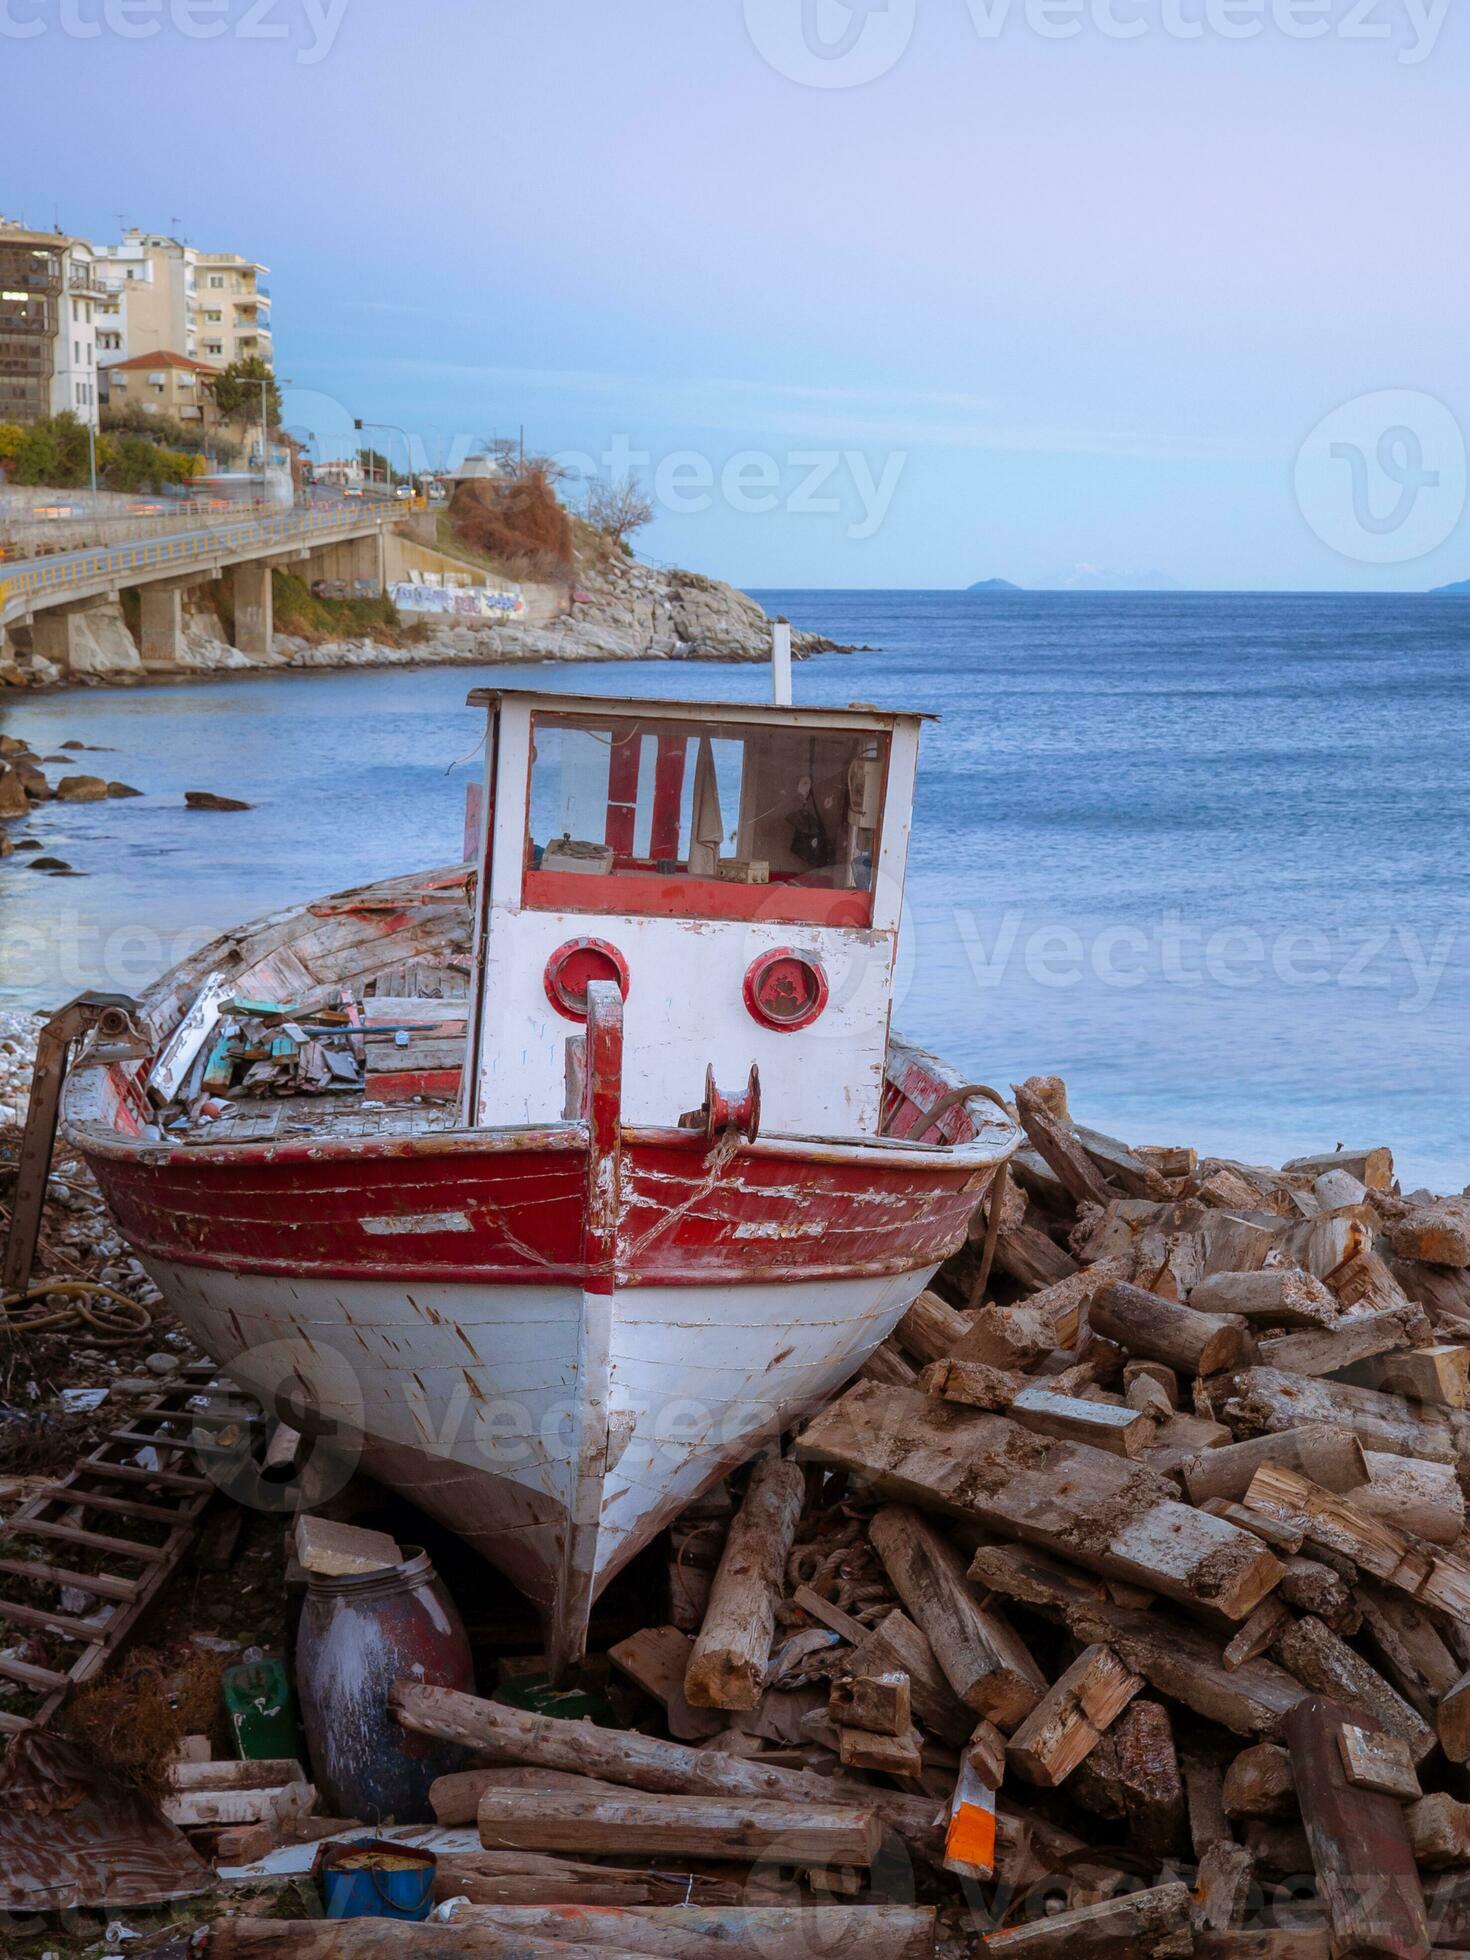 https://static.vecteezy.com/system/resources/previews/031/203/457/large_2x/abandoned-red-and-white-small-wooden-fishing-boat-photo.jpg